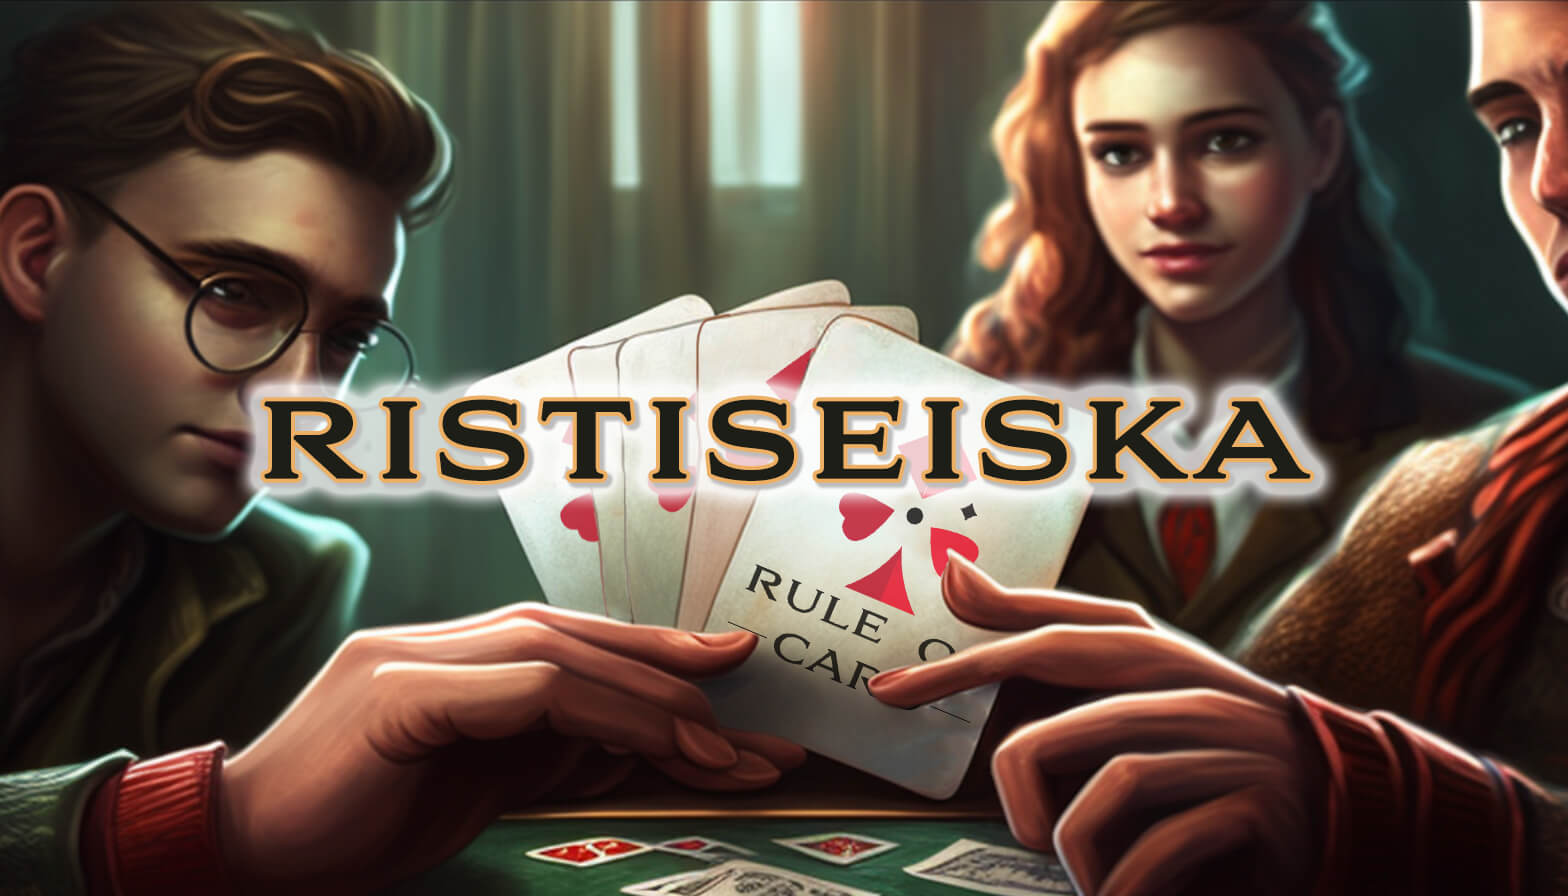 Playing the card game Ristiseiska